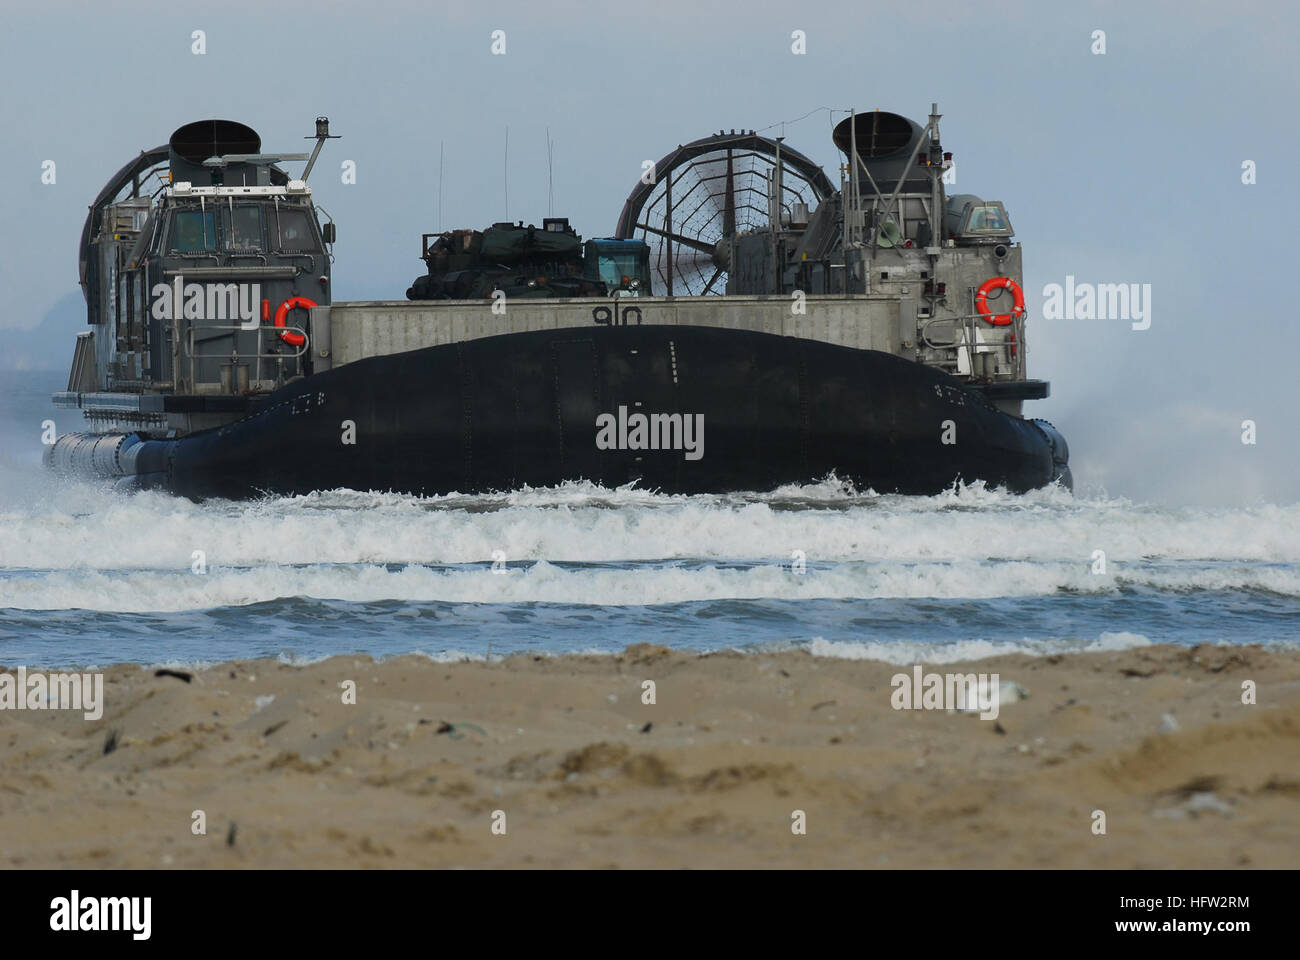 071111-N-0120A-085  PO HANG, Korea (Nov. 11, 2007)  Landing Craft Air Cushion (LCAC) 90, from the ÒDragonsÓ of Assault Craft Unit (ACU) 5 Det. Western Pacific, rides in the surf to the beach at Po Hang. LCACs from ACU-5 spent the day transiting to and from the amphibious assault ship USS Essex (LHD 2) in order to embark U.S. and Republic of Korea Marines. Essex is the lead ship of the only forward-deployed U.S. Expeditionary Strike Group and serves as the flagship for CTF 76, the Navy's only forward-deployed amphibious force commander. Task Force 76 is headquartered at White Beach Naval Facili Stock Photo